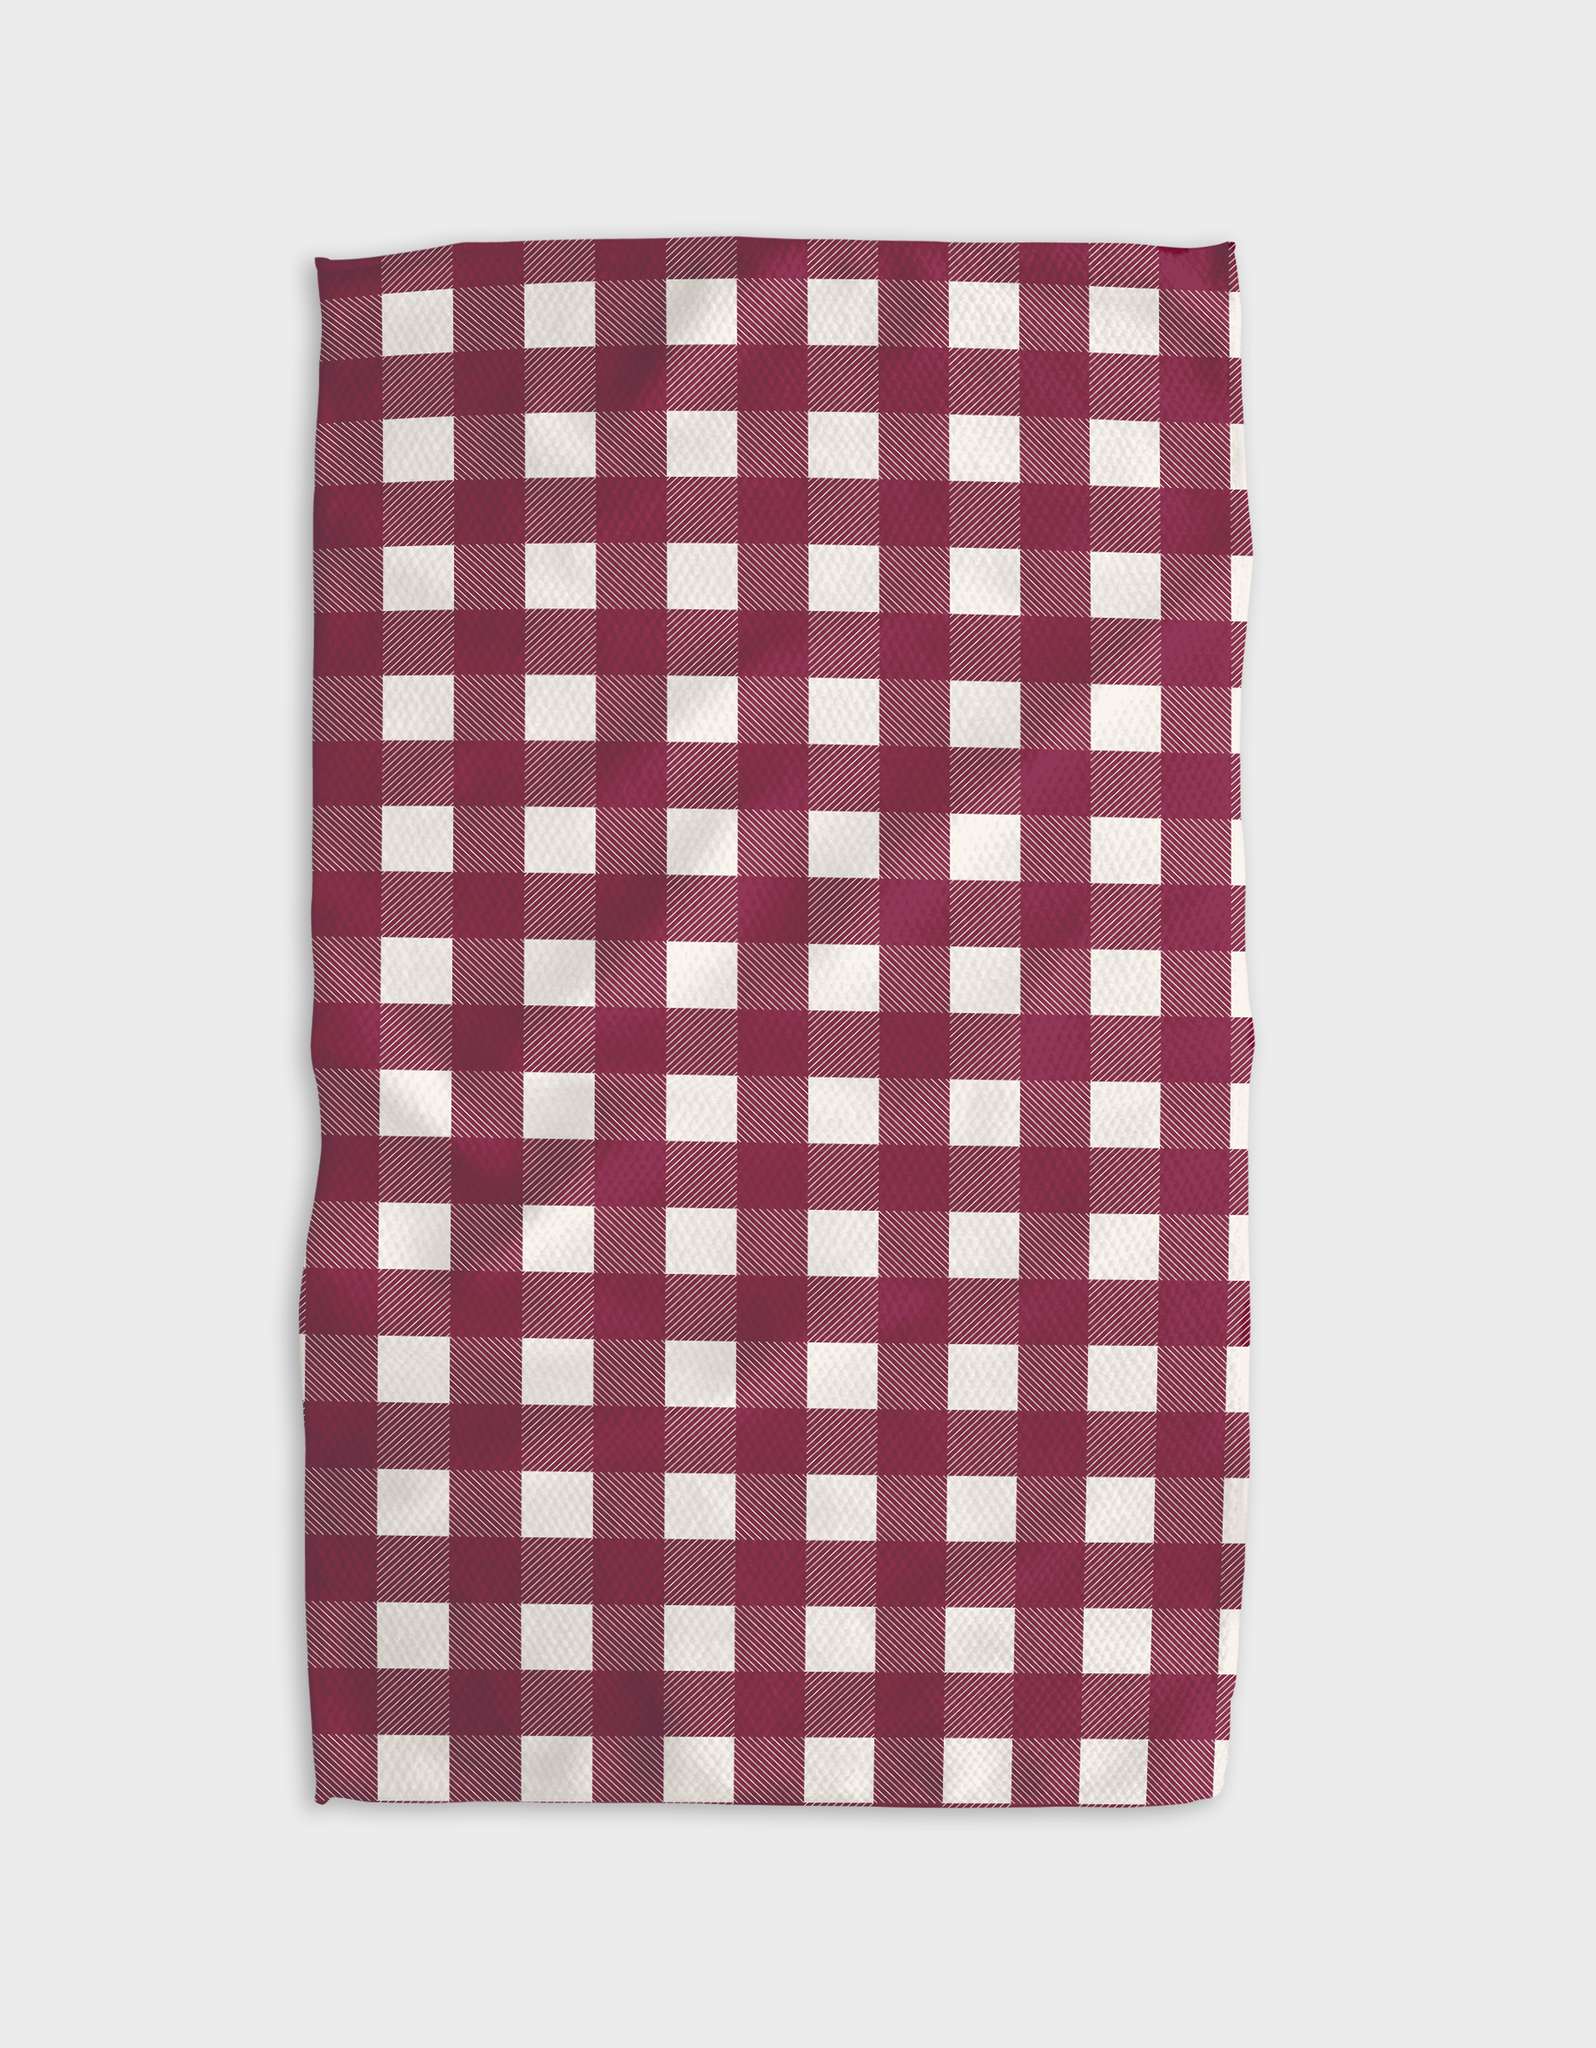 Holiday Geometry kitchen towels would make great swap gifts under